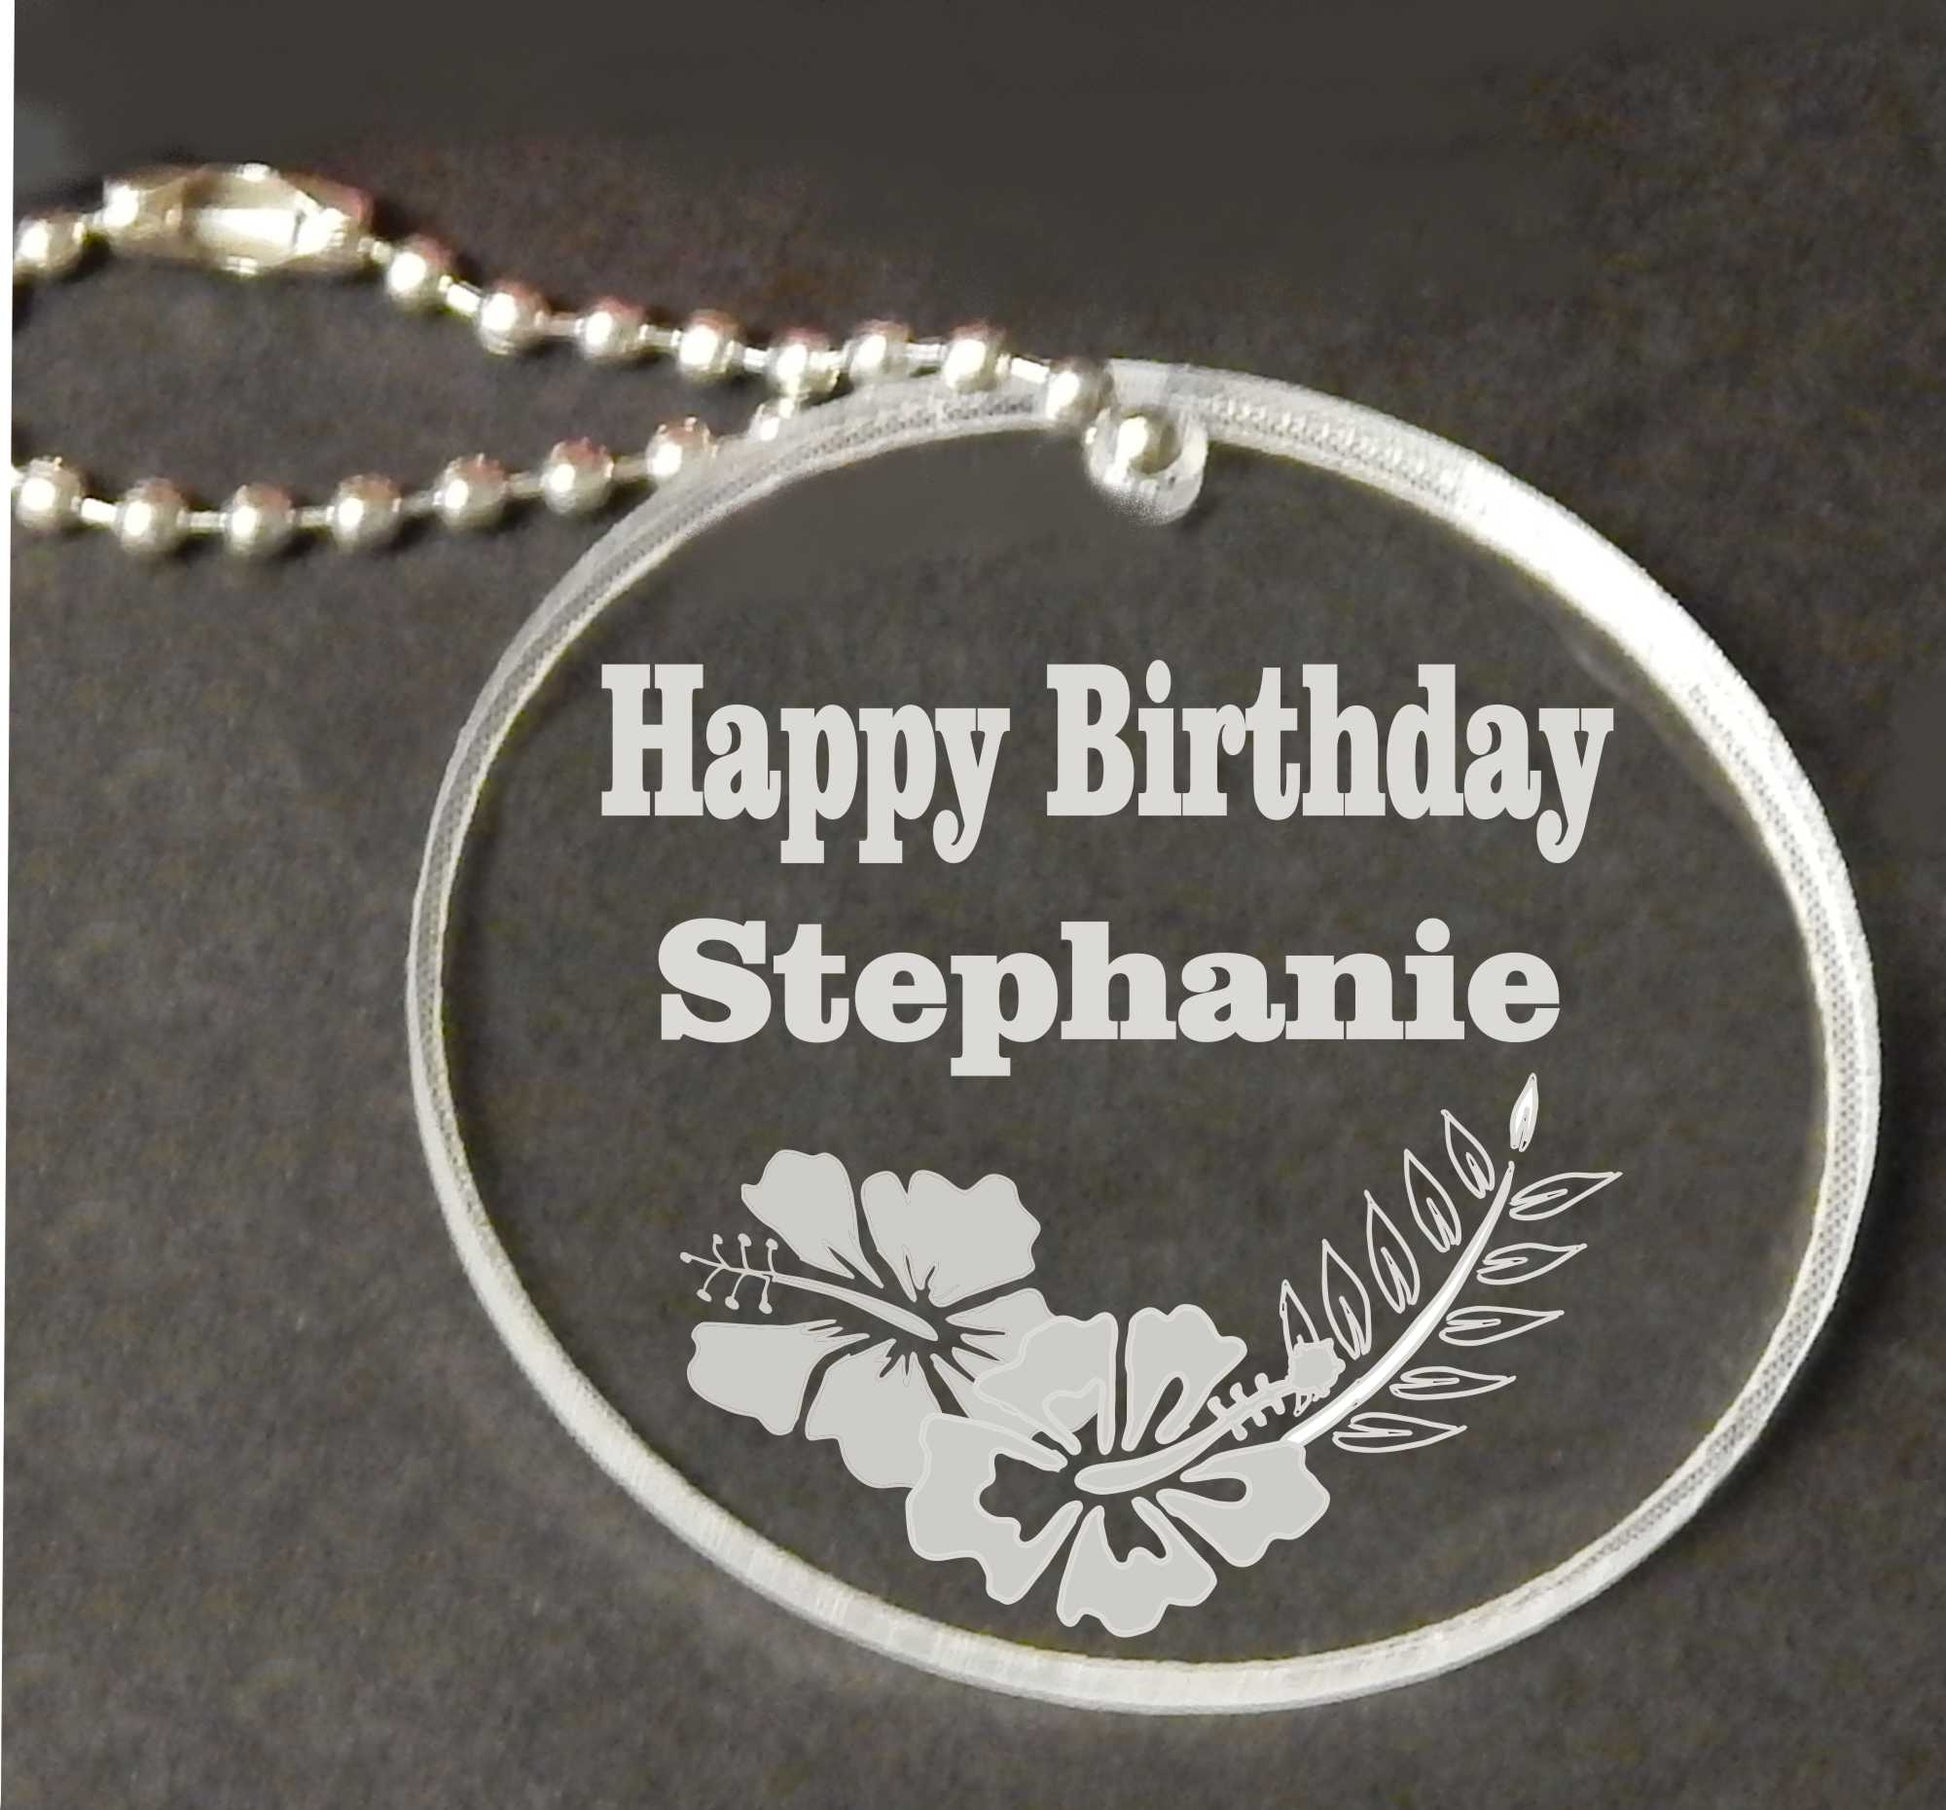 clear acrylic round keychain shown with Happy Birthday, name and designed with hibiscus flowers at bottom along with a small chain attached